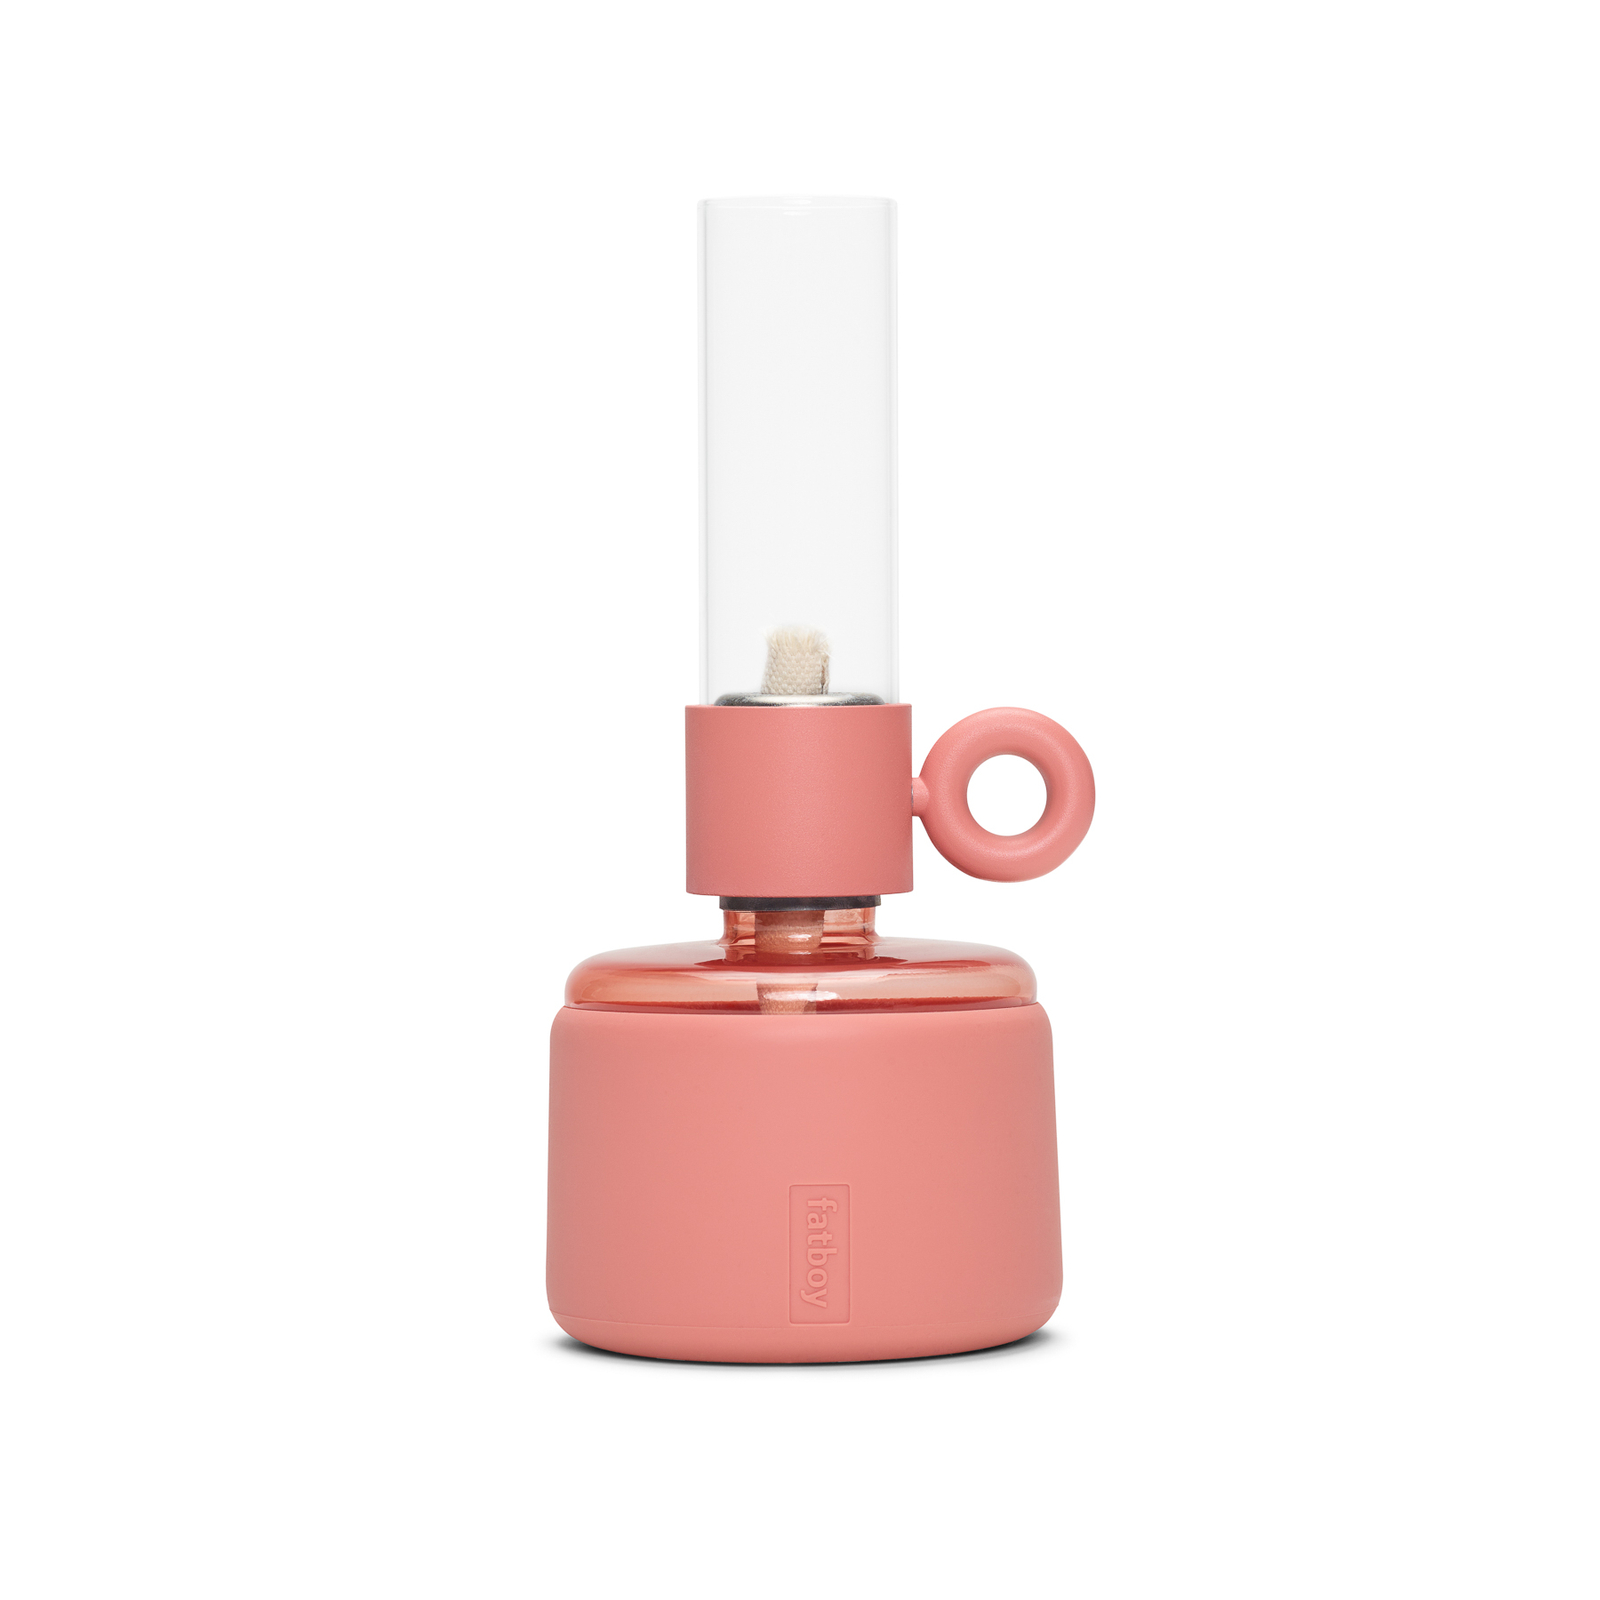 Fatboy Flamtastique XS olielamp, cheeky pink